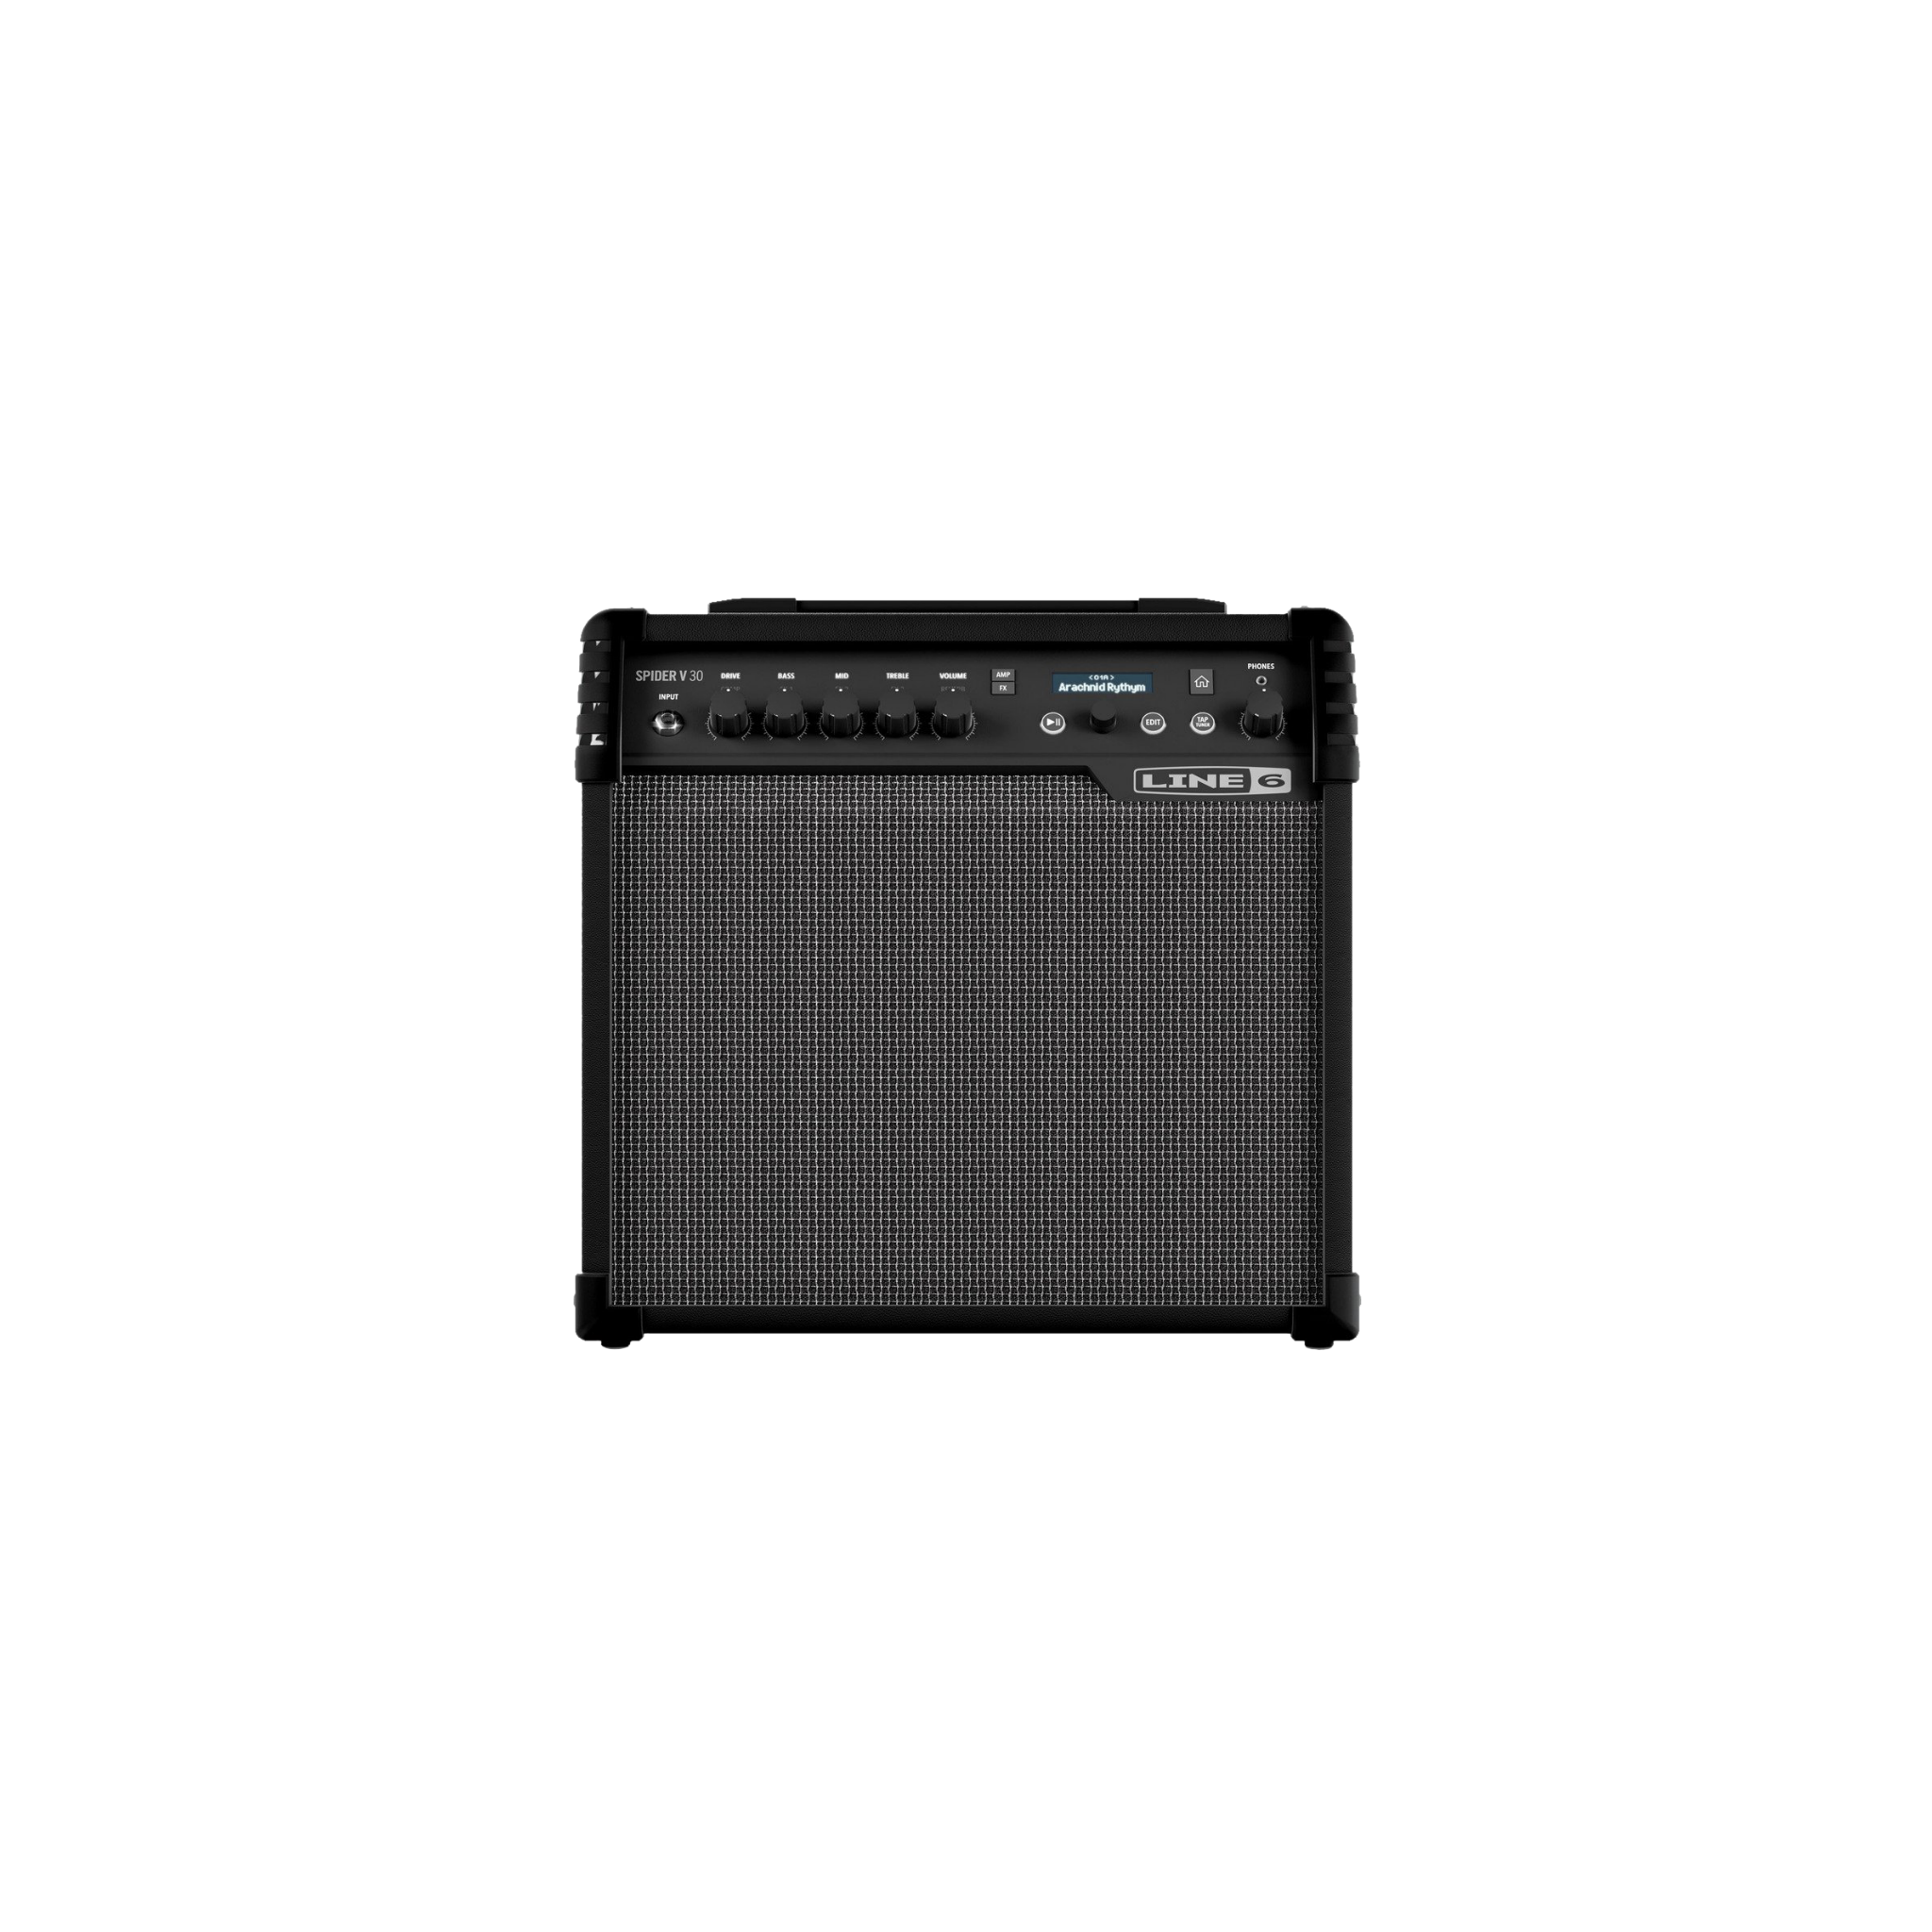 Line 6 Spider V 30 MKII 30 Watt Guitar Amp Mk II with Modeling and Effects, enhanced sound and feel, updated look